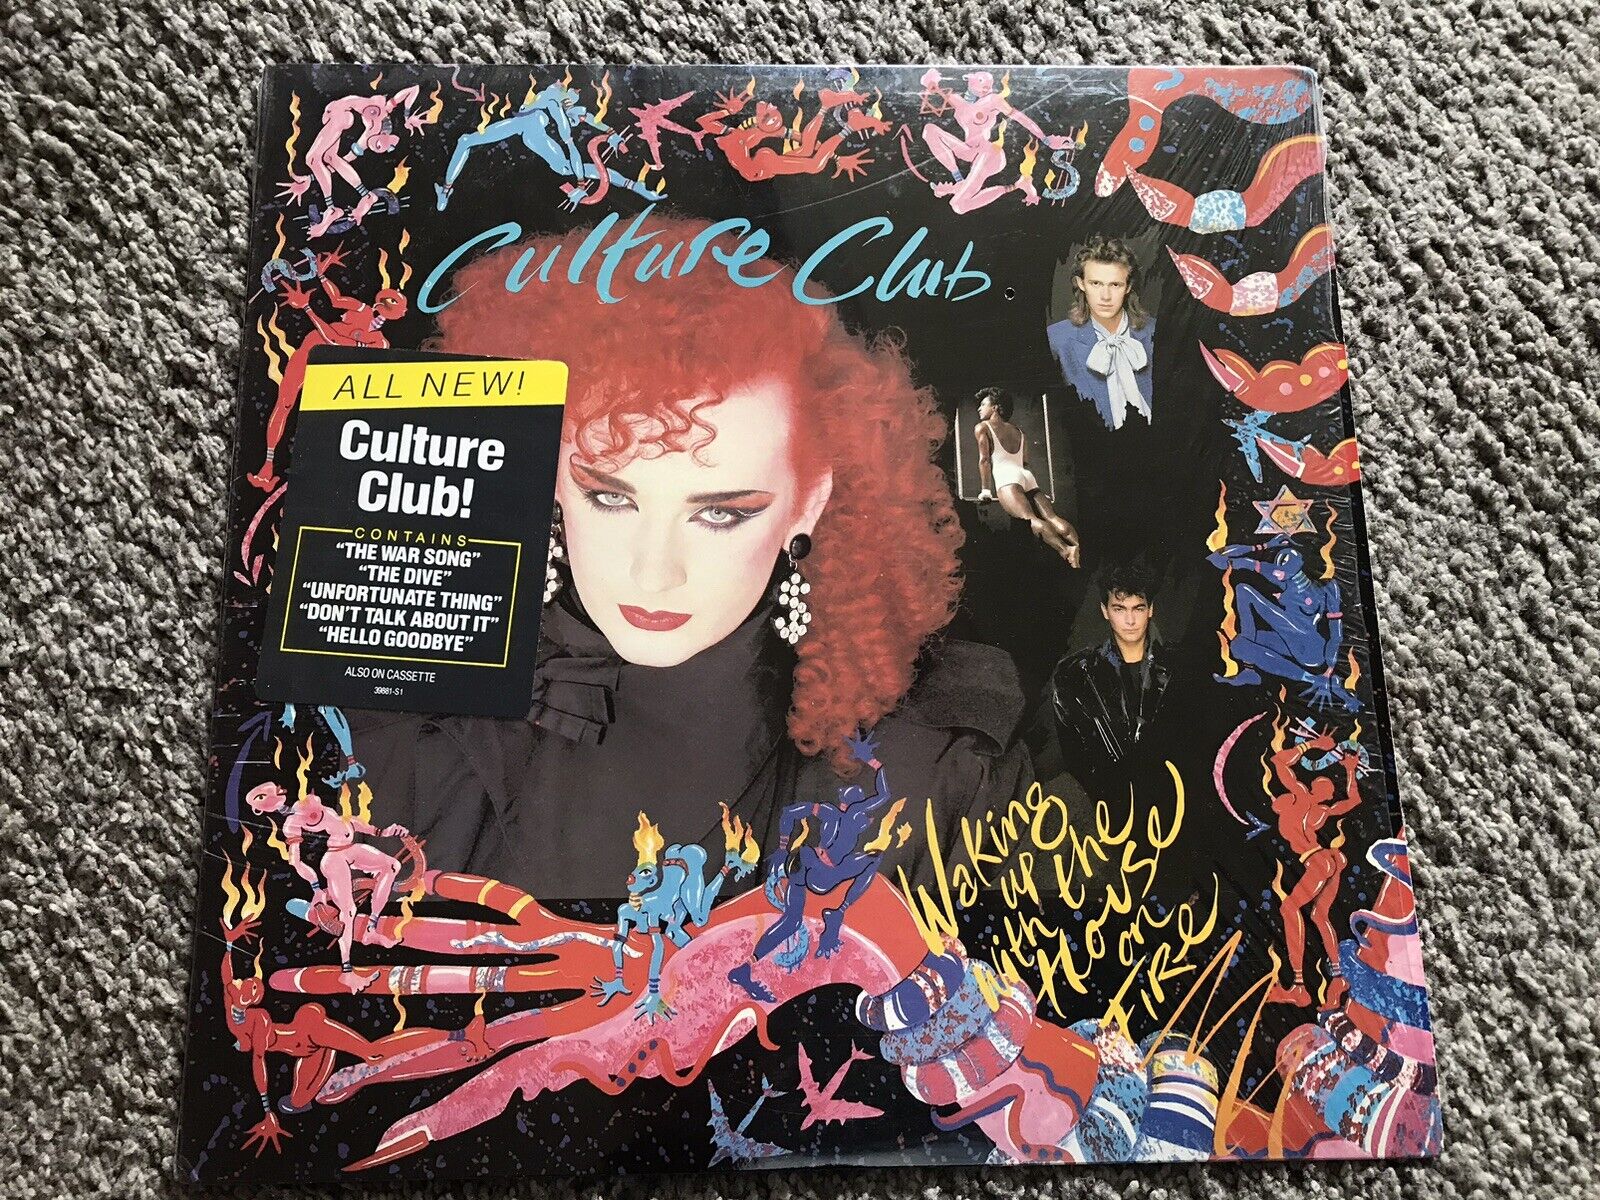 Culture Club Lp   Waking Up With The House On Fire  1984  VG Condition